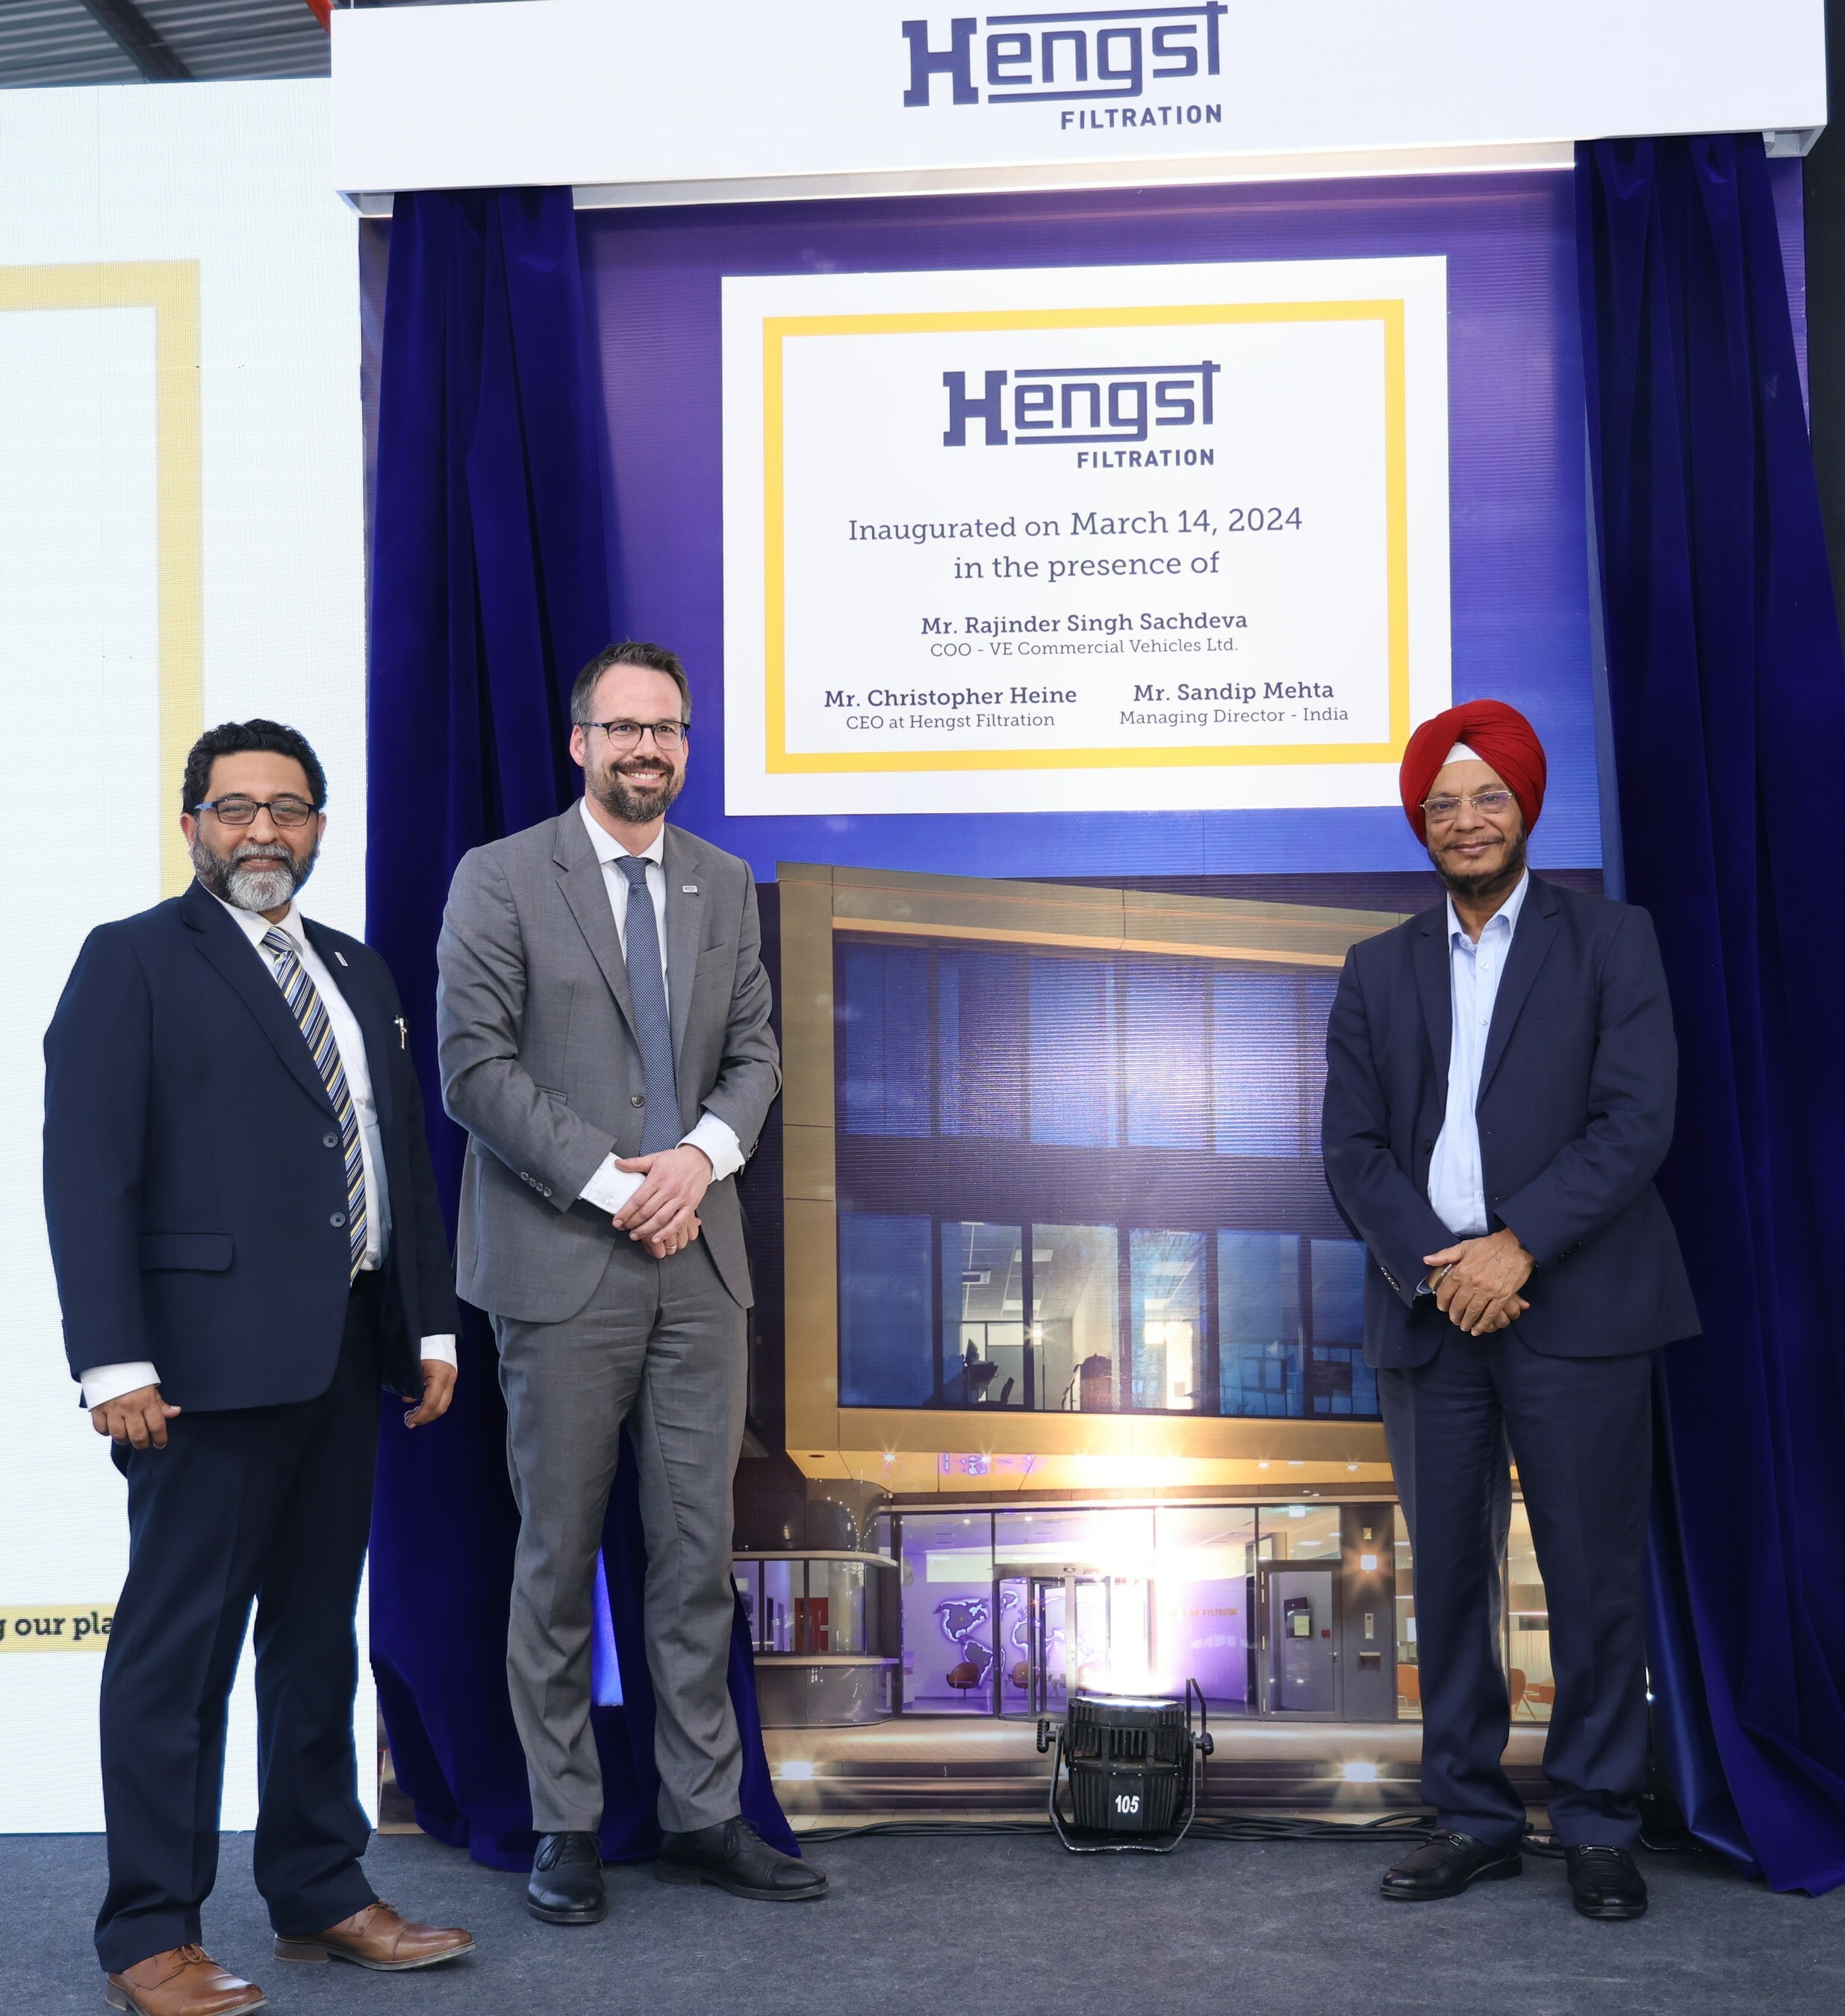 Hengst Filtration Unveils State-of-the-Art Facility in Bengaluru